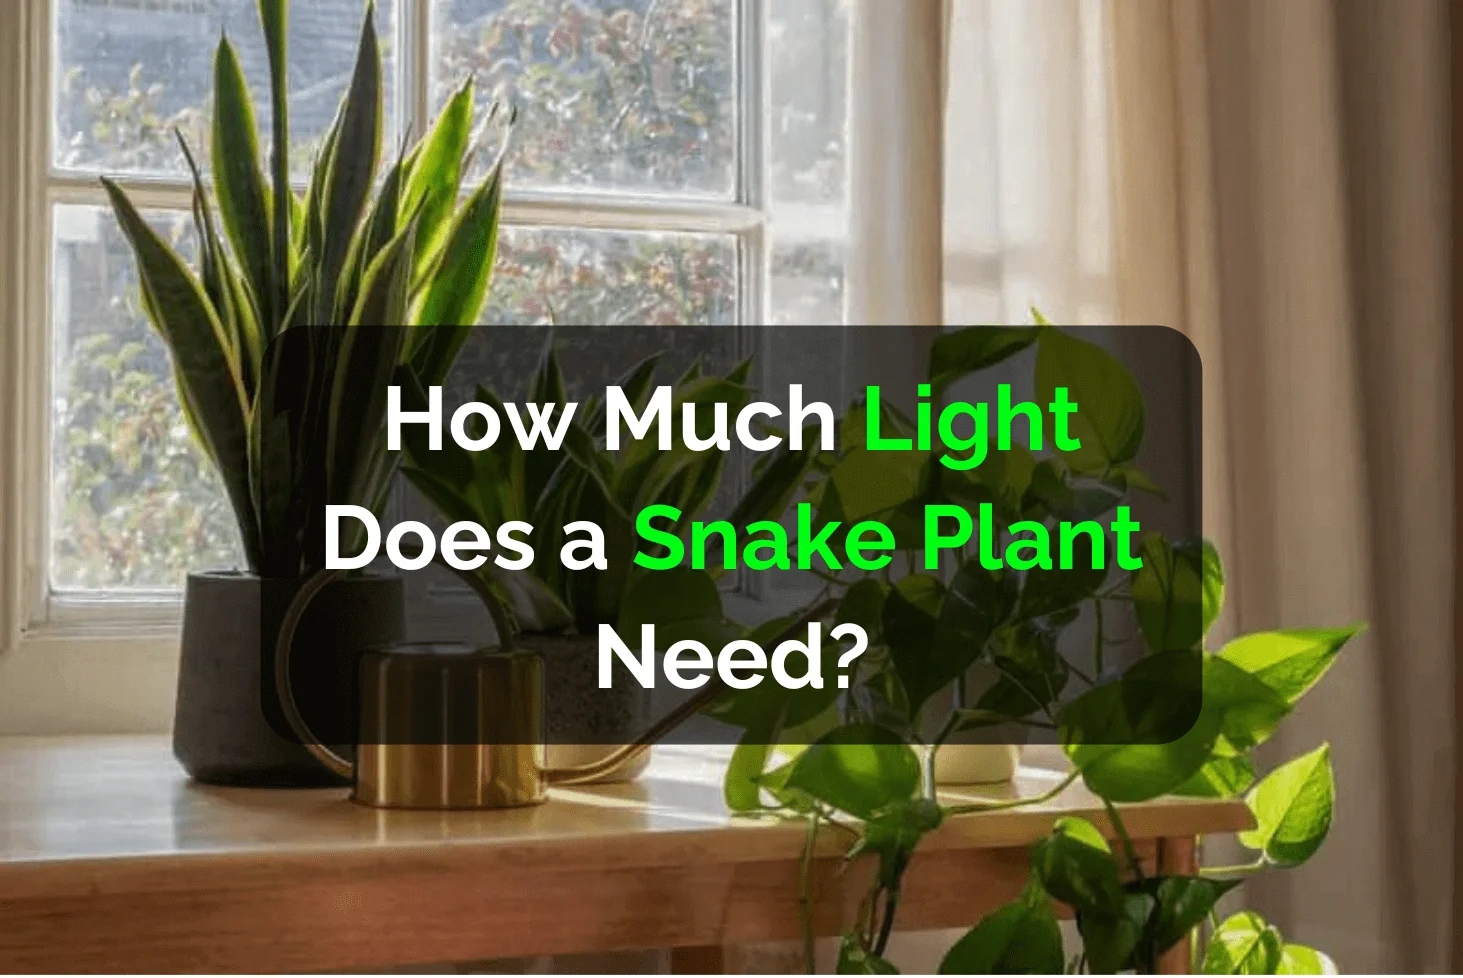 How Much Light Does a Snake Plant Need?